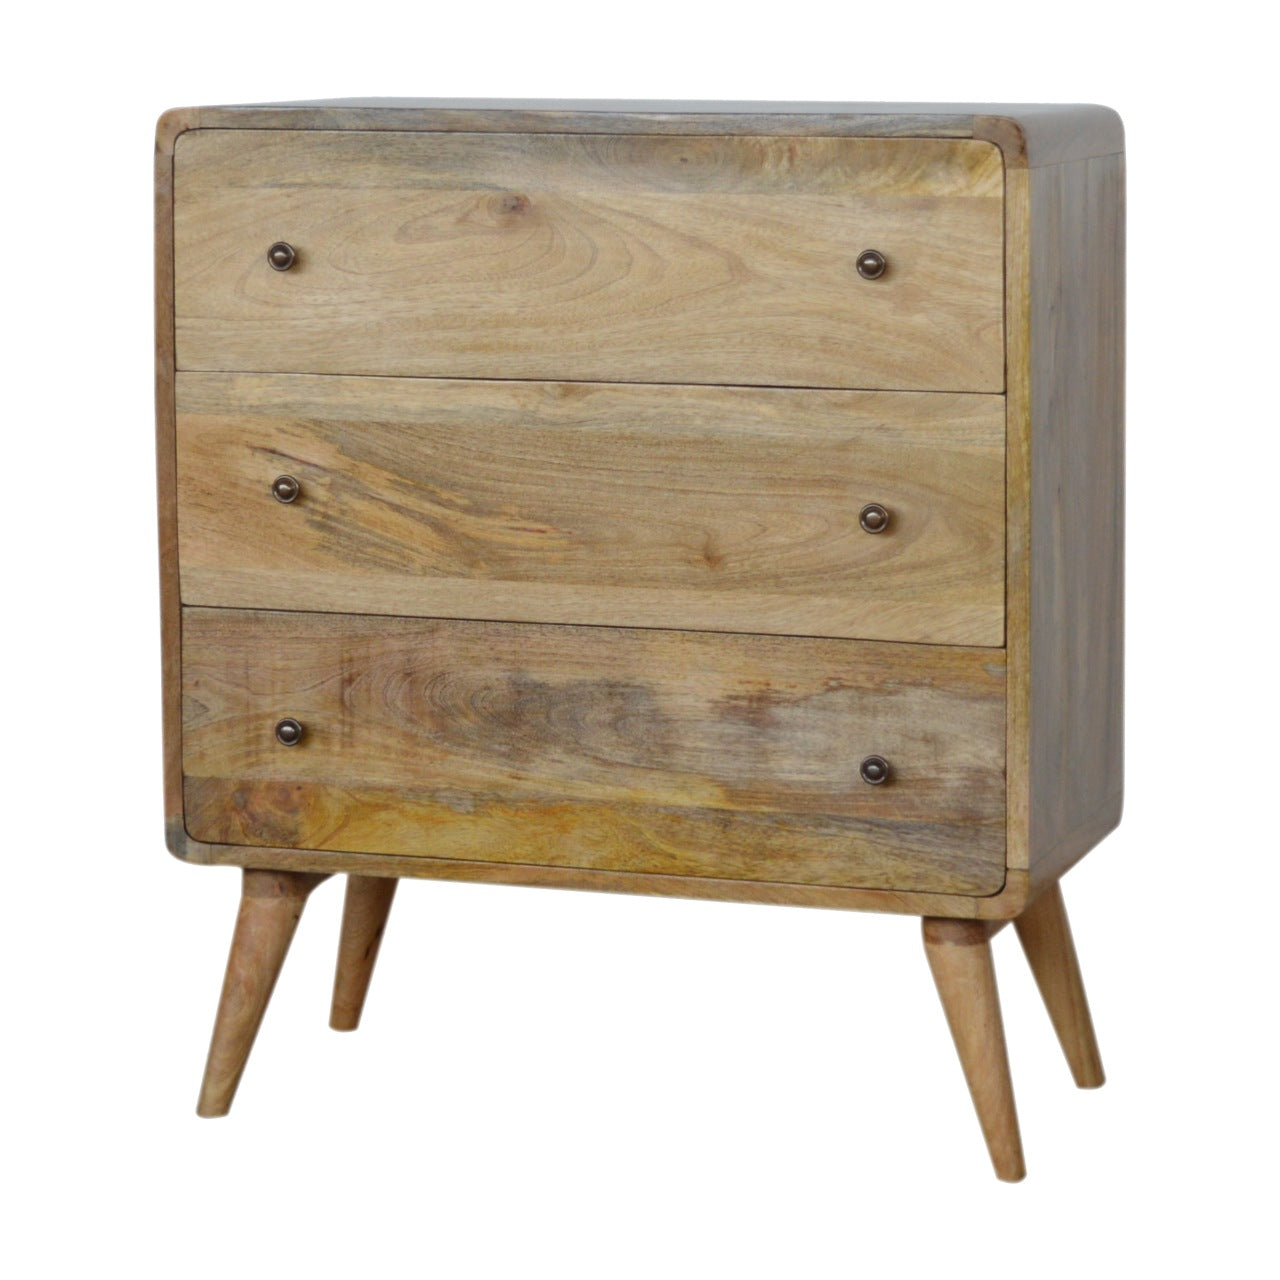 Curved Oak-Ish Solid Wood Chest of Drawers